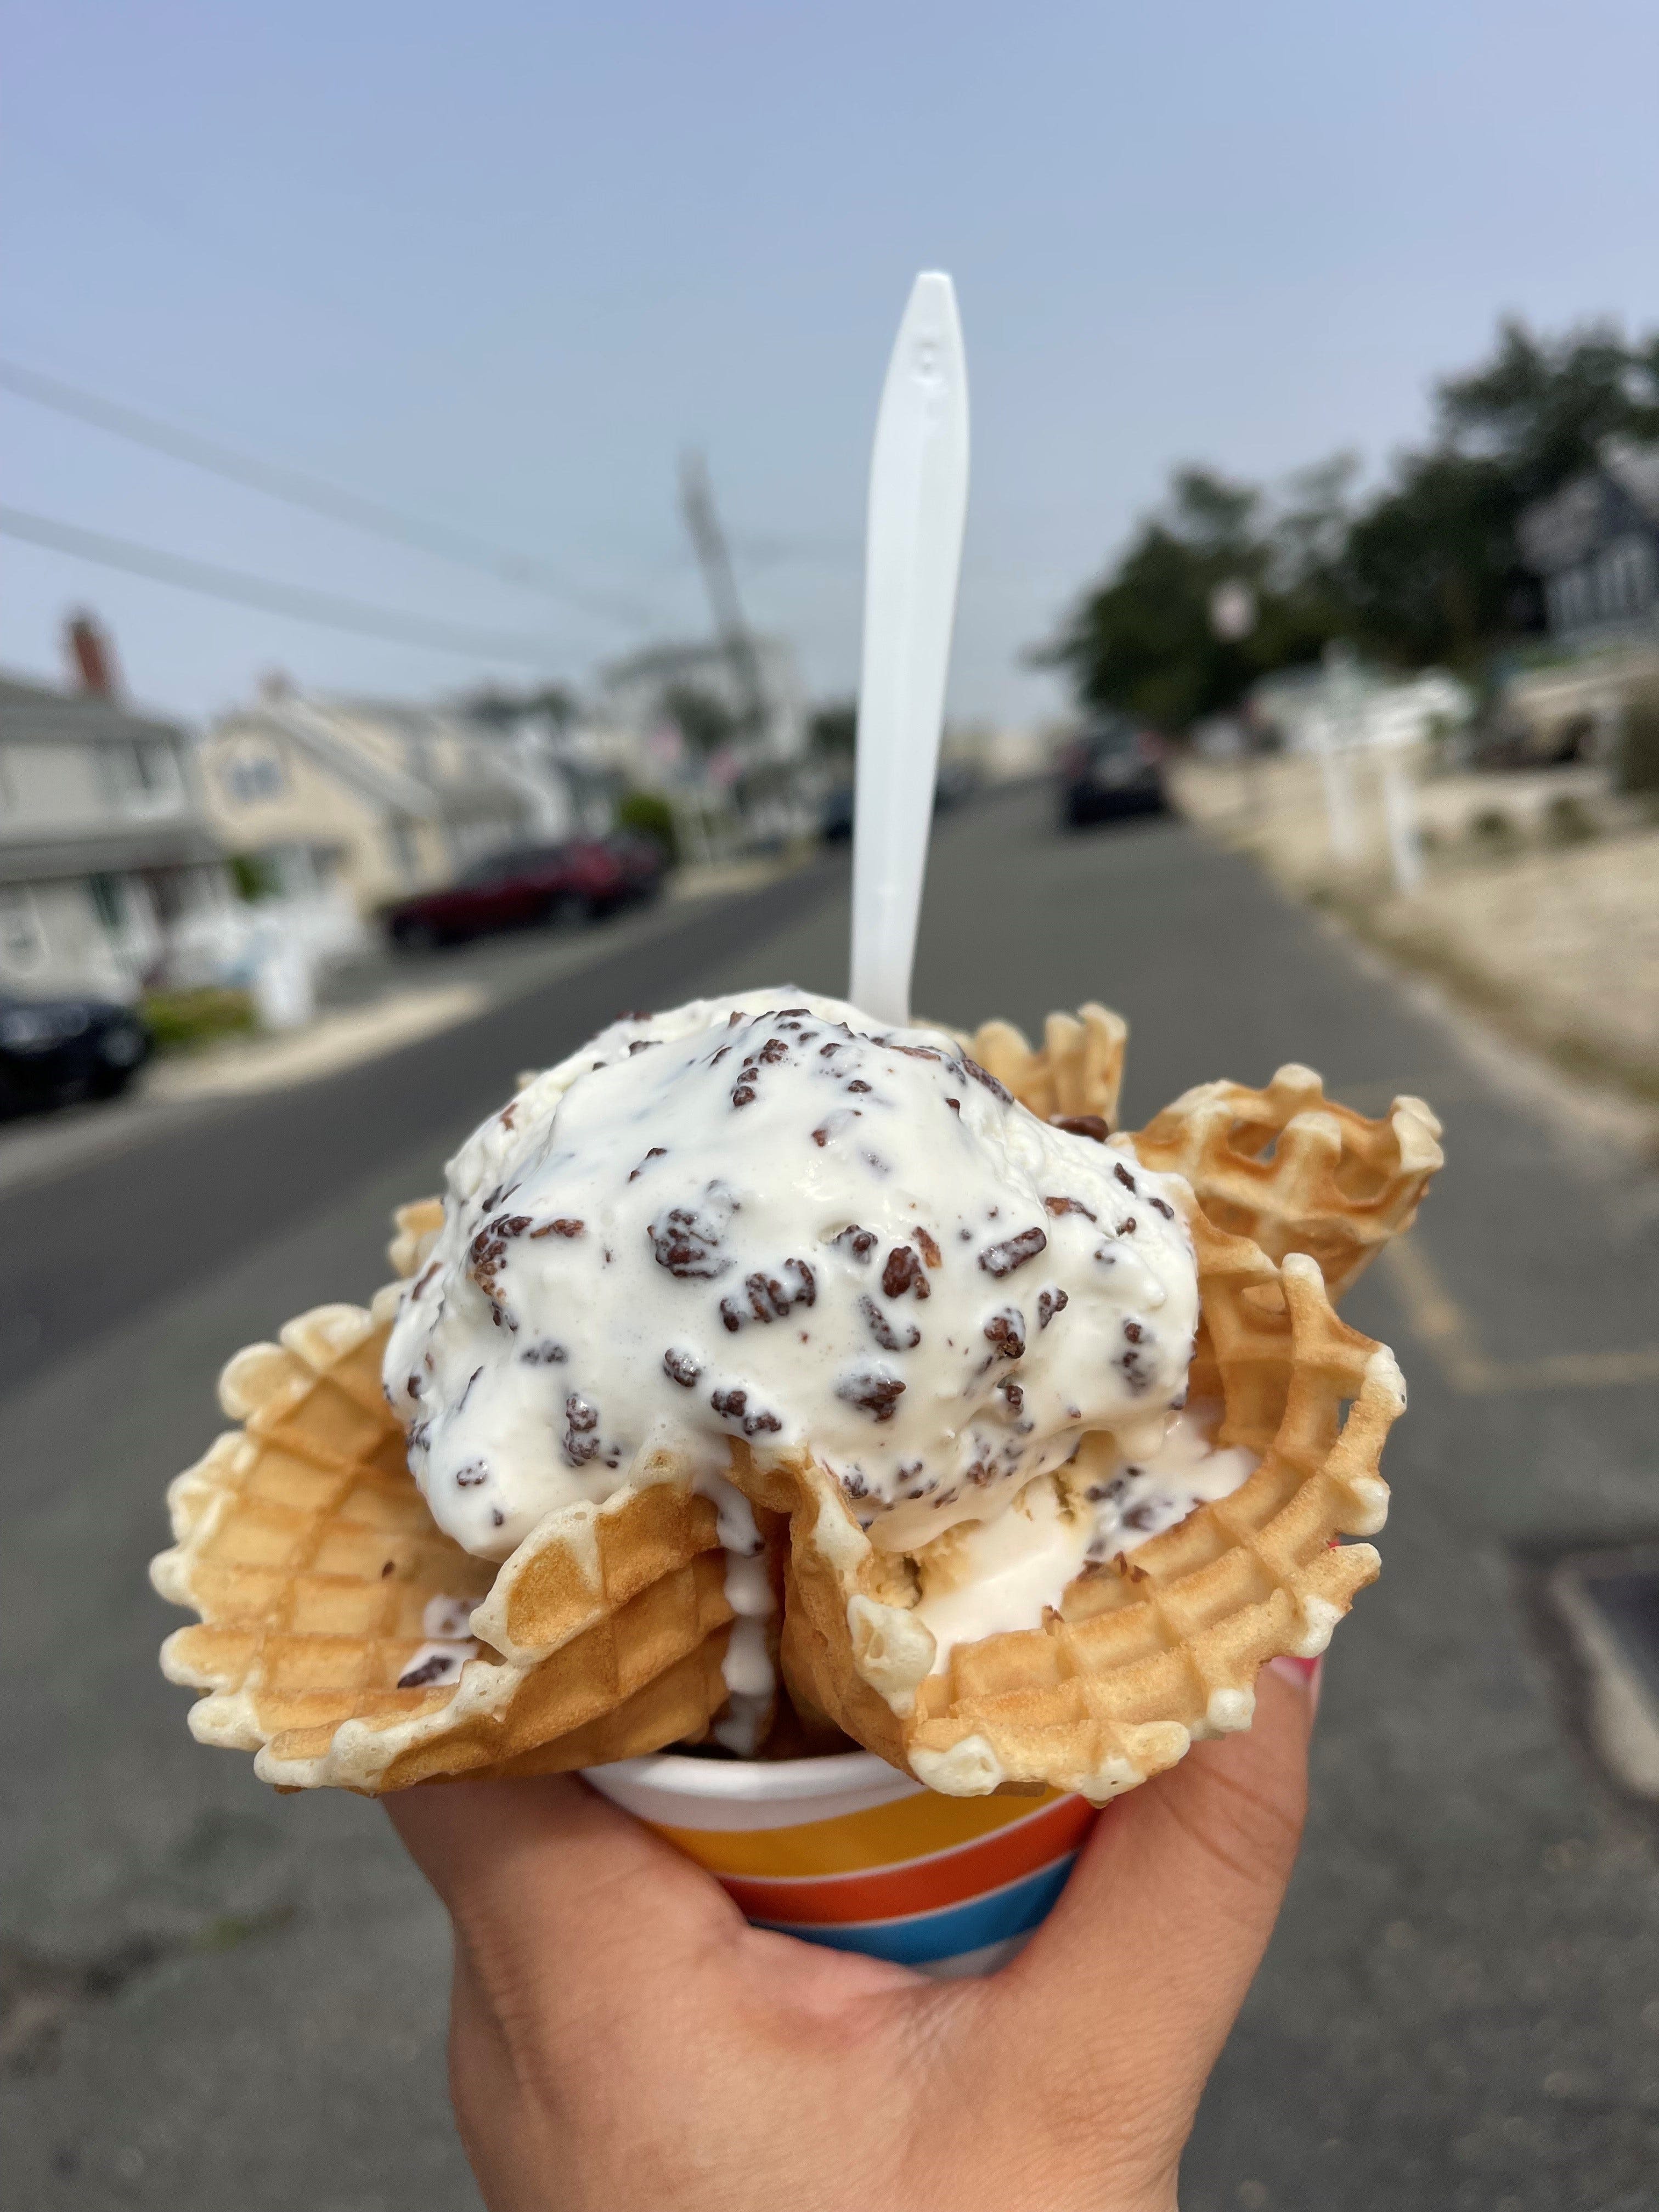 New Jersey ice cream tour features 12 shops across the state – and prizes!